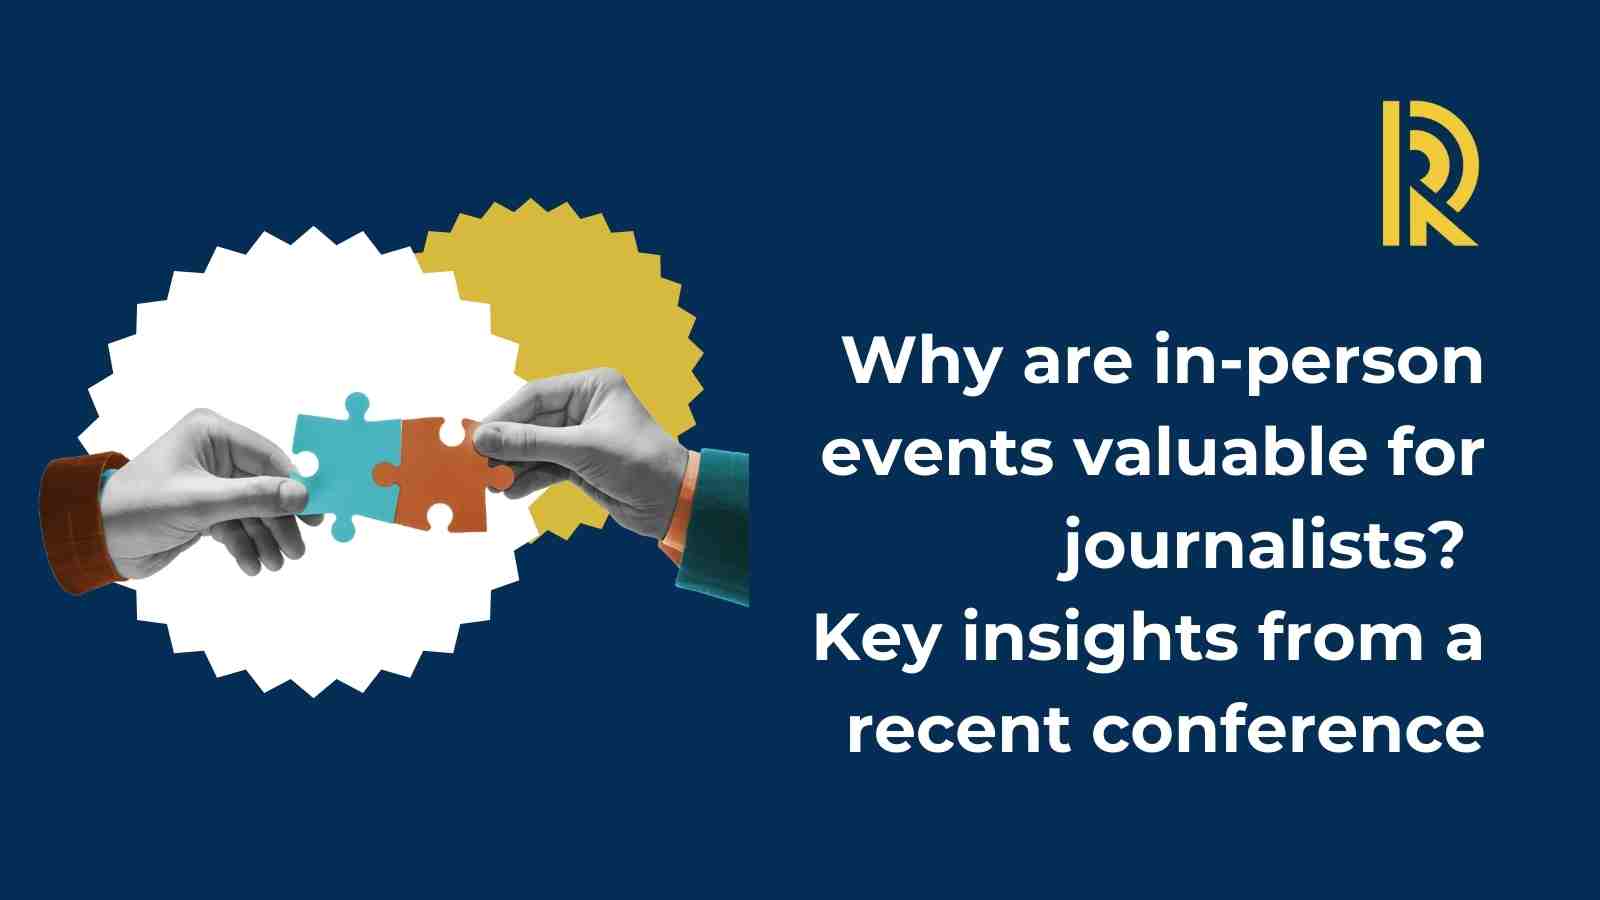 Why are in-person events valuable for journalists? Key insights from a recent conference